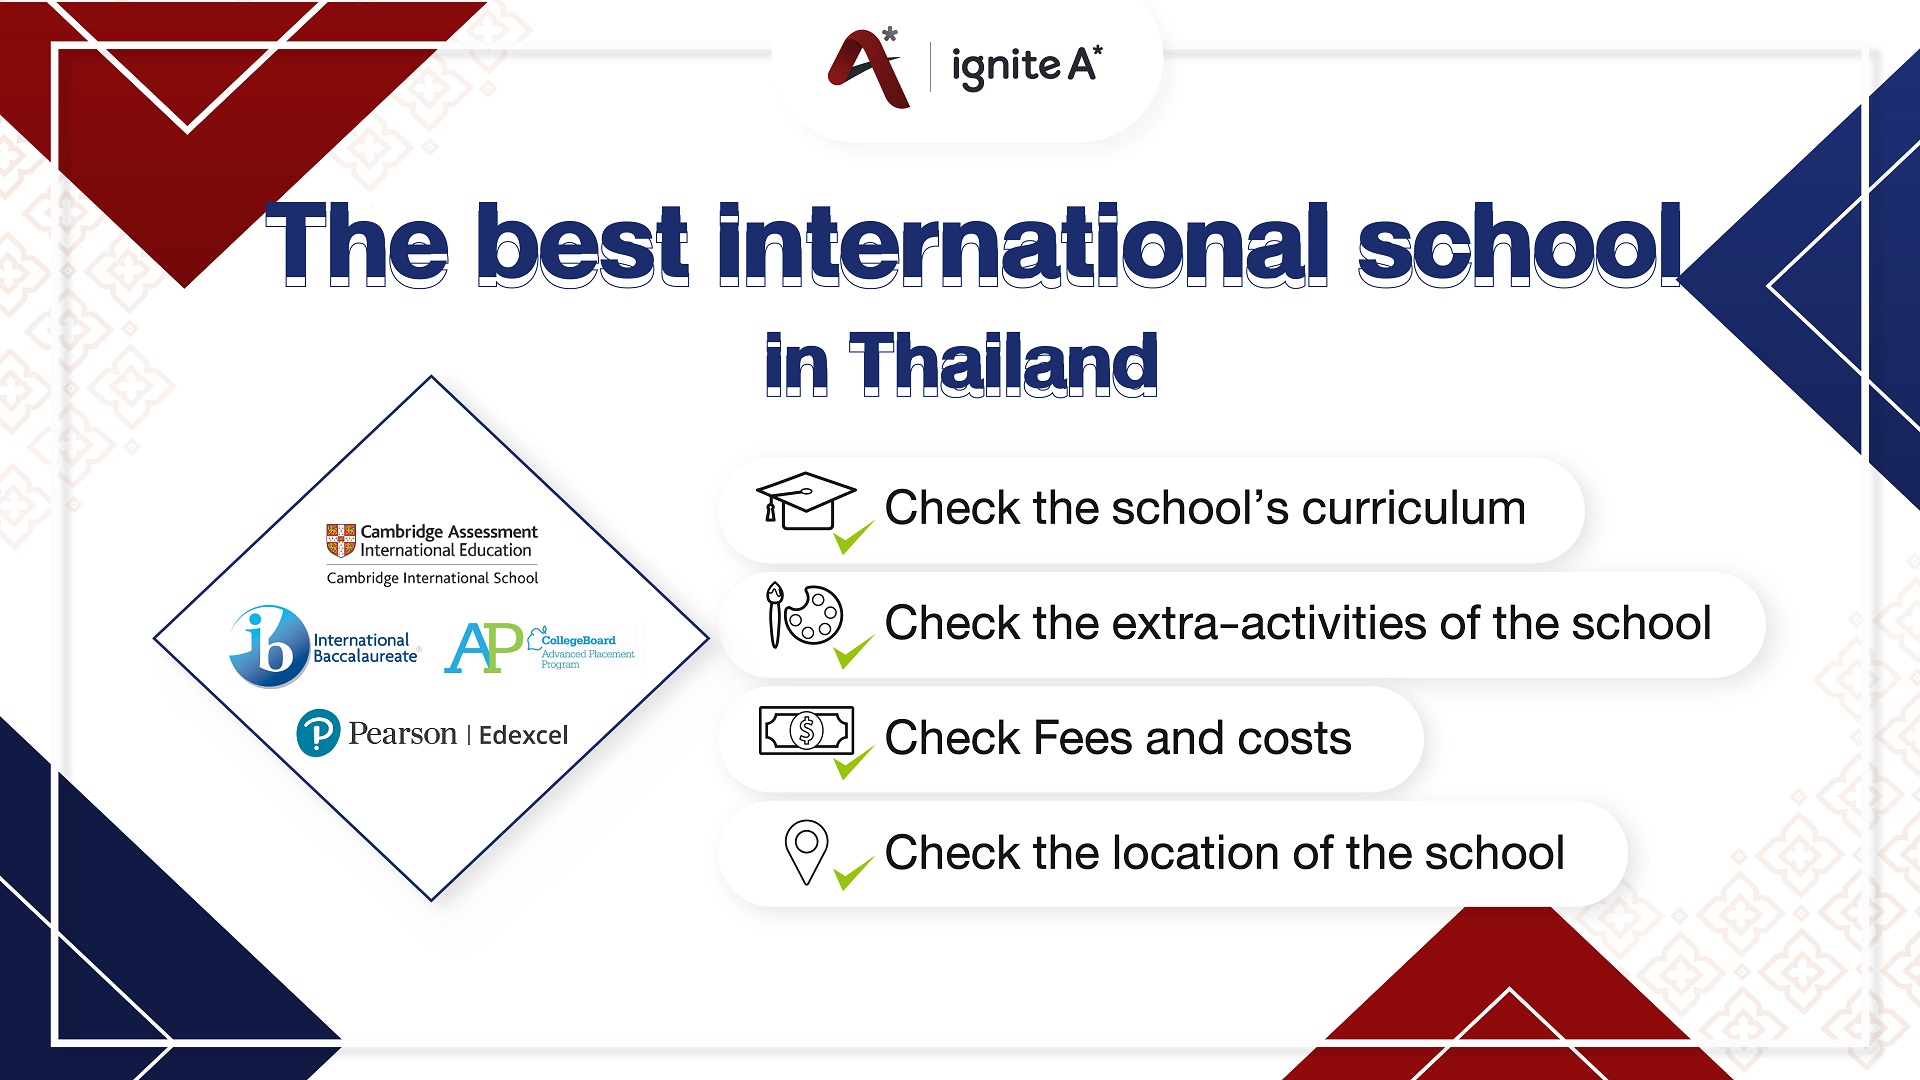 The best international school in Thailand - ignite a star - Bigcover2